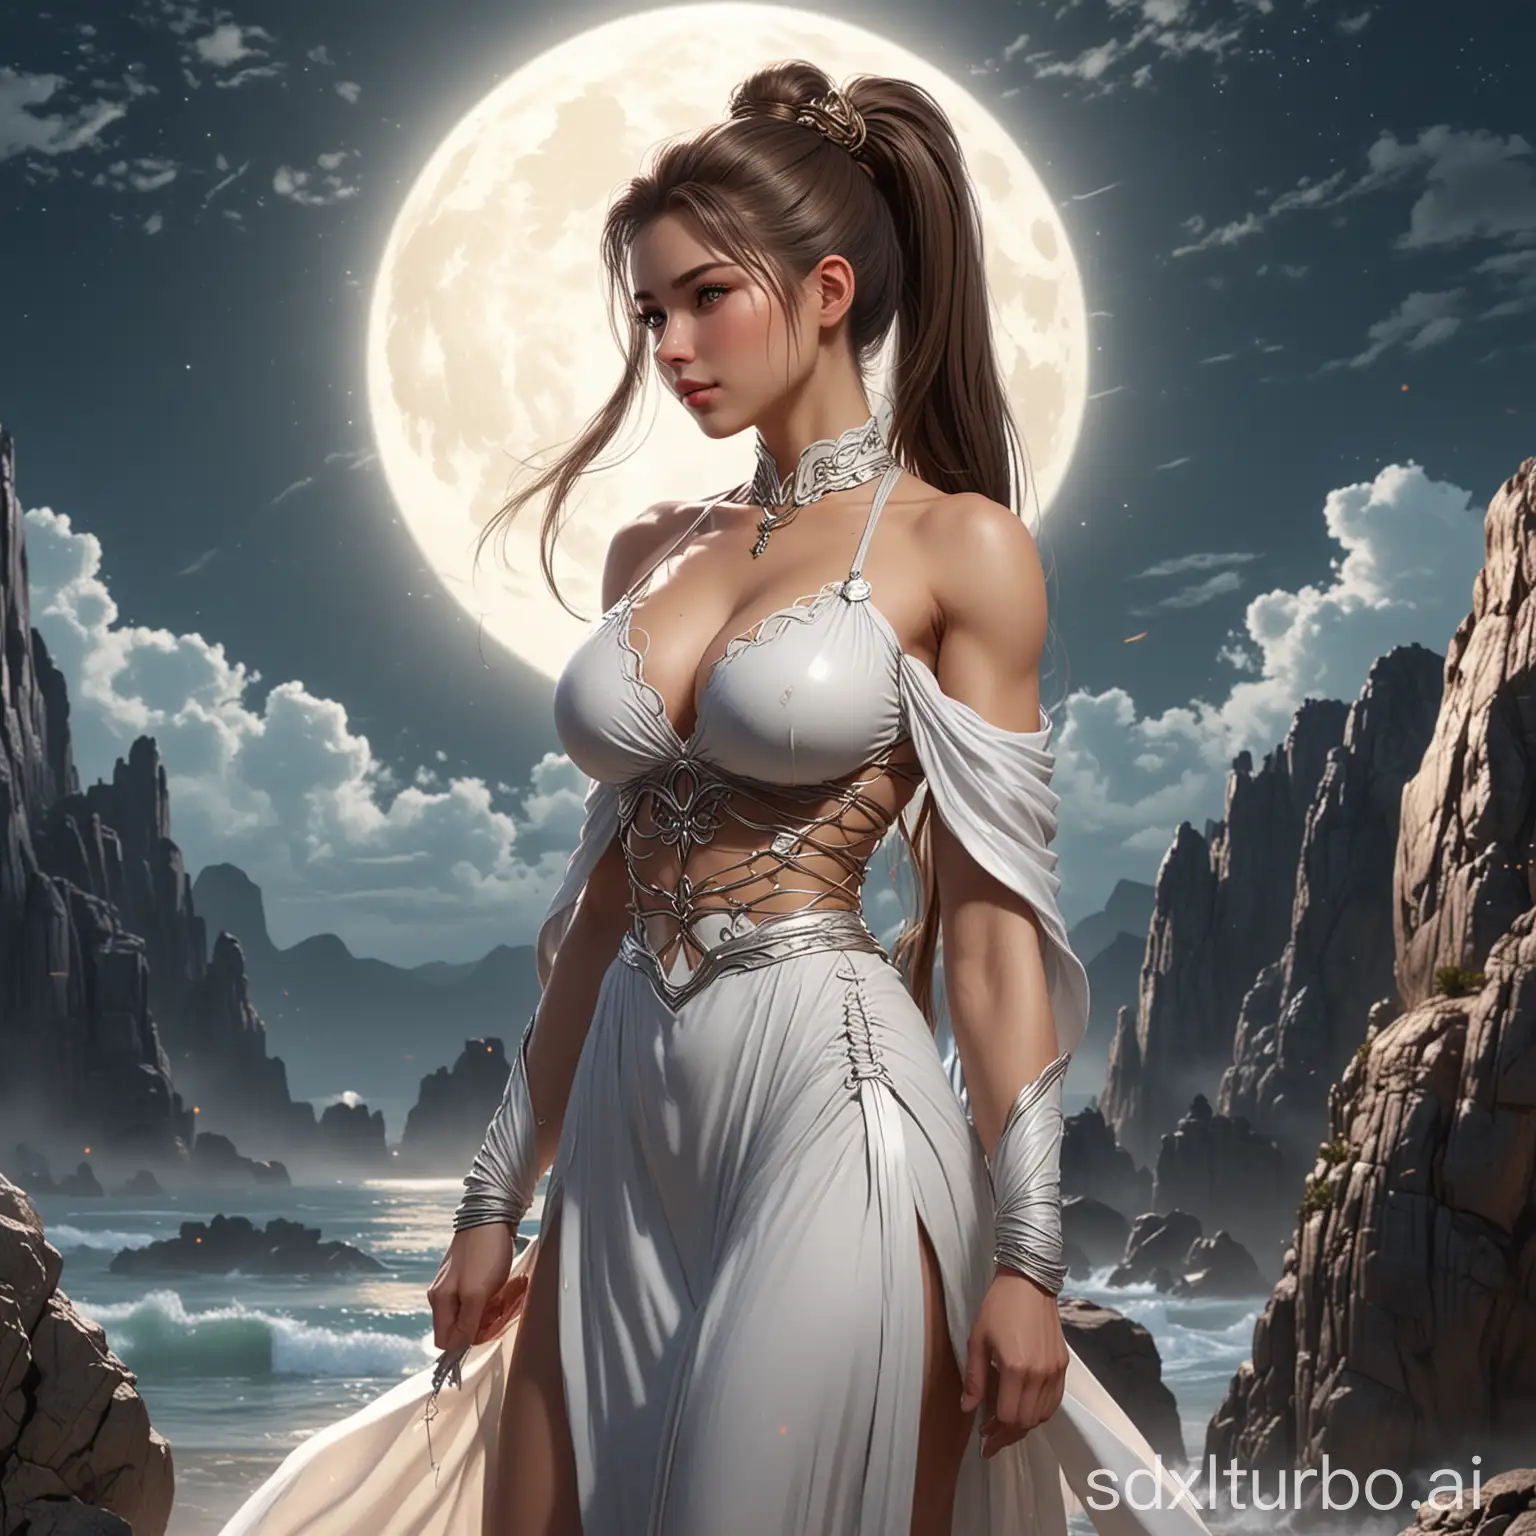 A woman in a long dress stands on a rock，The background is a full moon, Anime Fantasy Artwork, anime epic artwork, fantasy art style, anime style 4k, anime art wallpaper 8k, Anime Art Wallpaper 4k, anime art wallpaper 4k, Anime Fantasy Illustration, Beautiful celestial mage, art jem style, style art, Fantasy style art，(perfect face+supermodel+Delicate skin+high ponytail+huge breasts),[[[muscle]]],(((Anatomically correct))) ,((8k+ultra high resolution+ultra high definition+masterpiece+detailed))